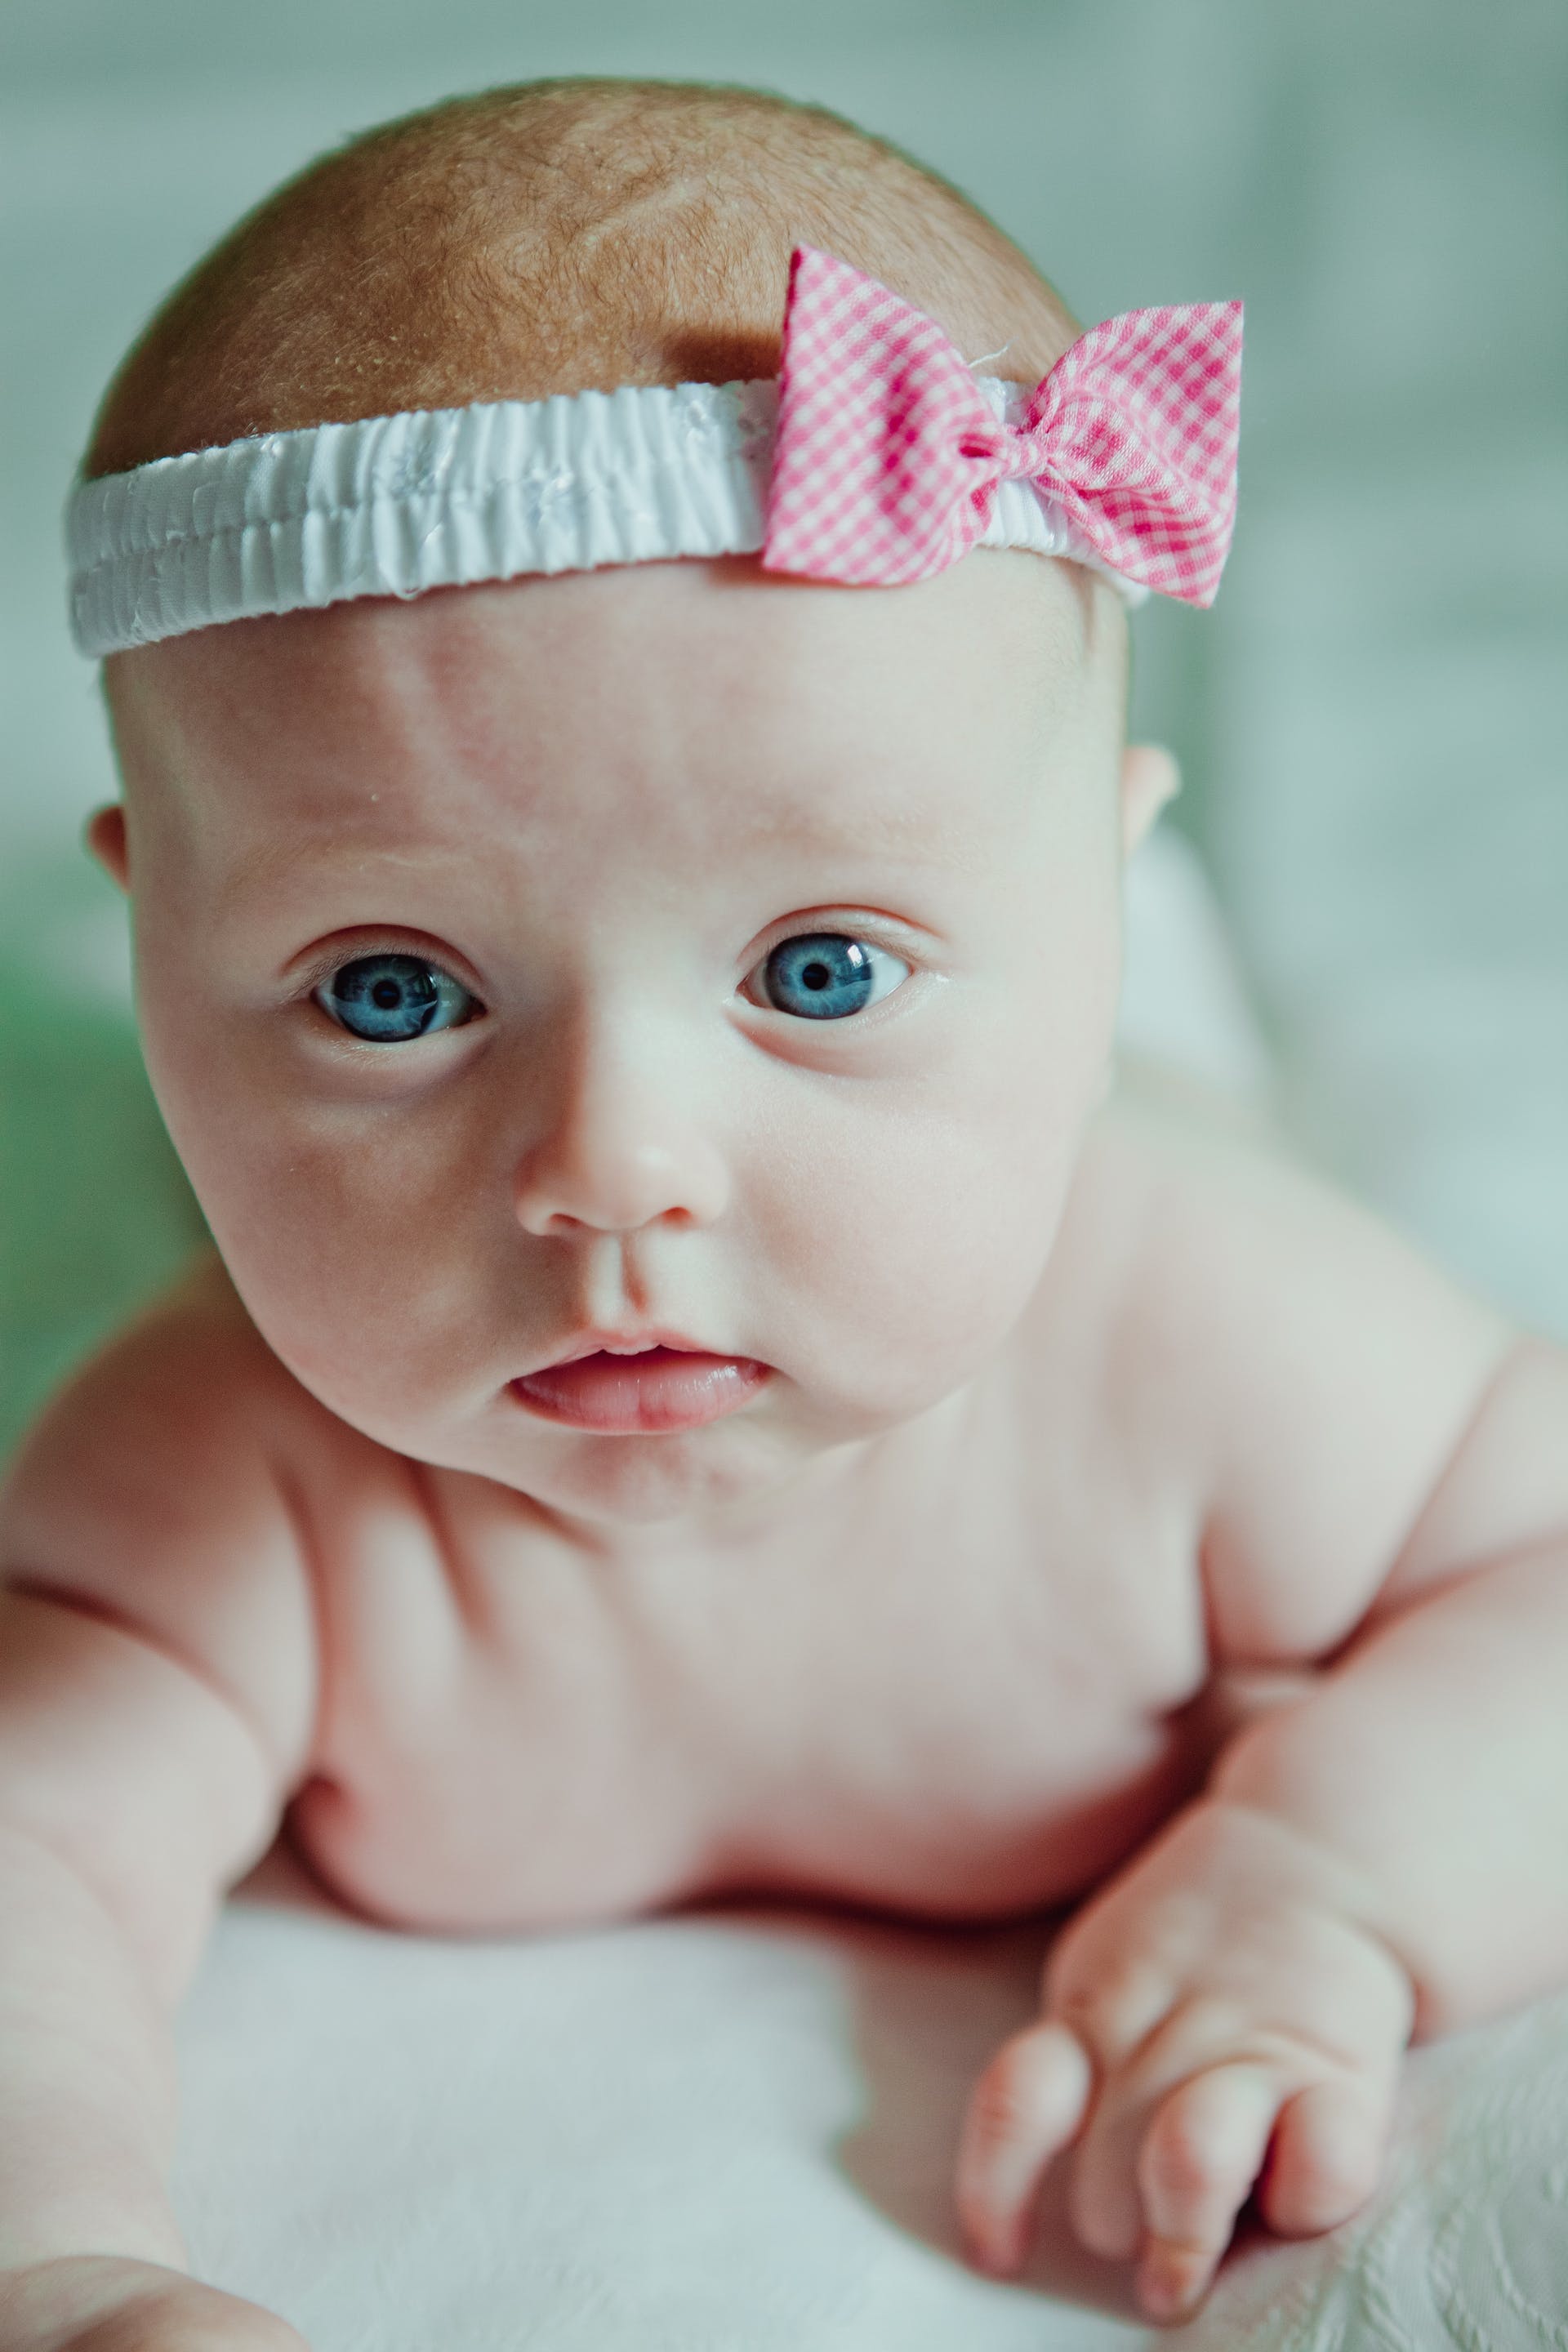 A close-up shot of a newborn with blue eyes and a headband | Source: Pexels